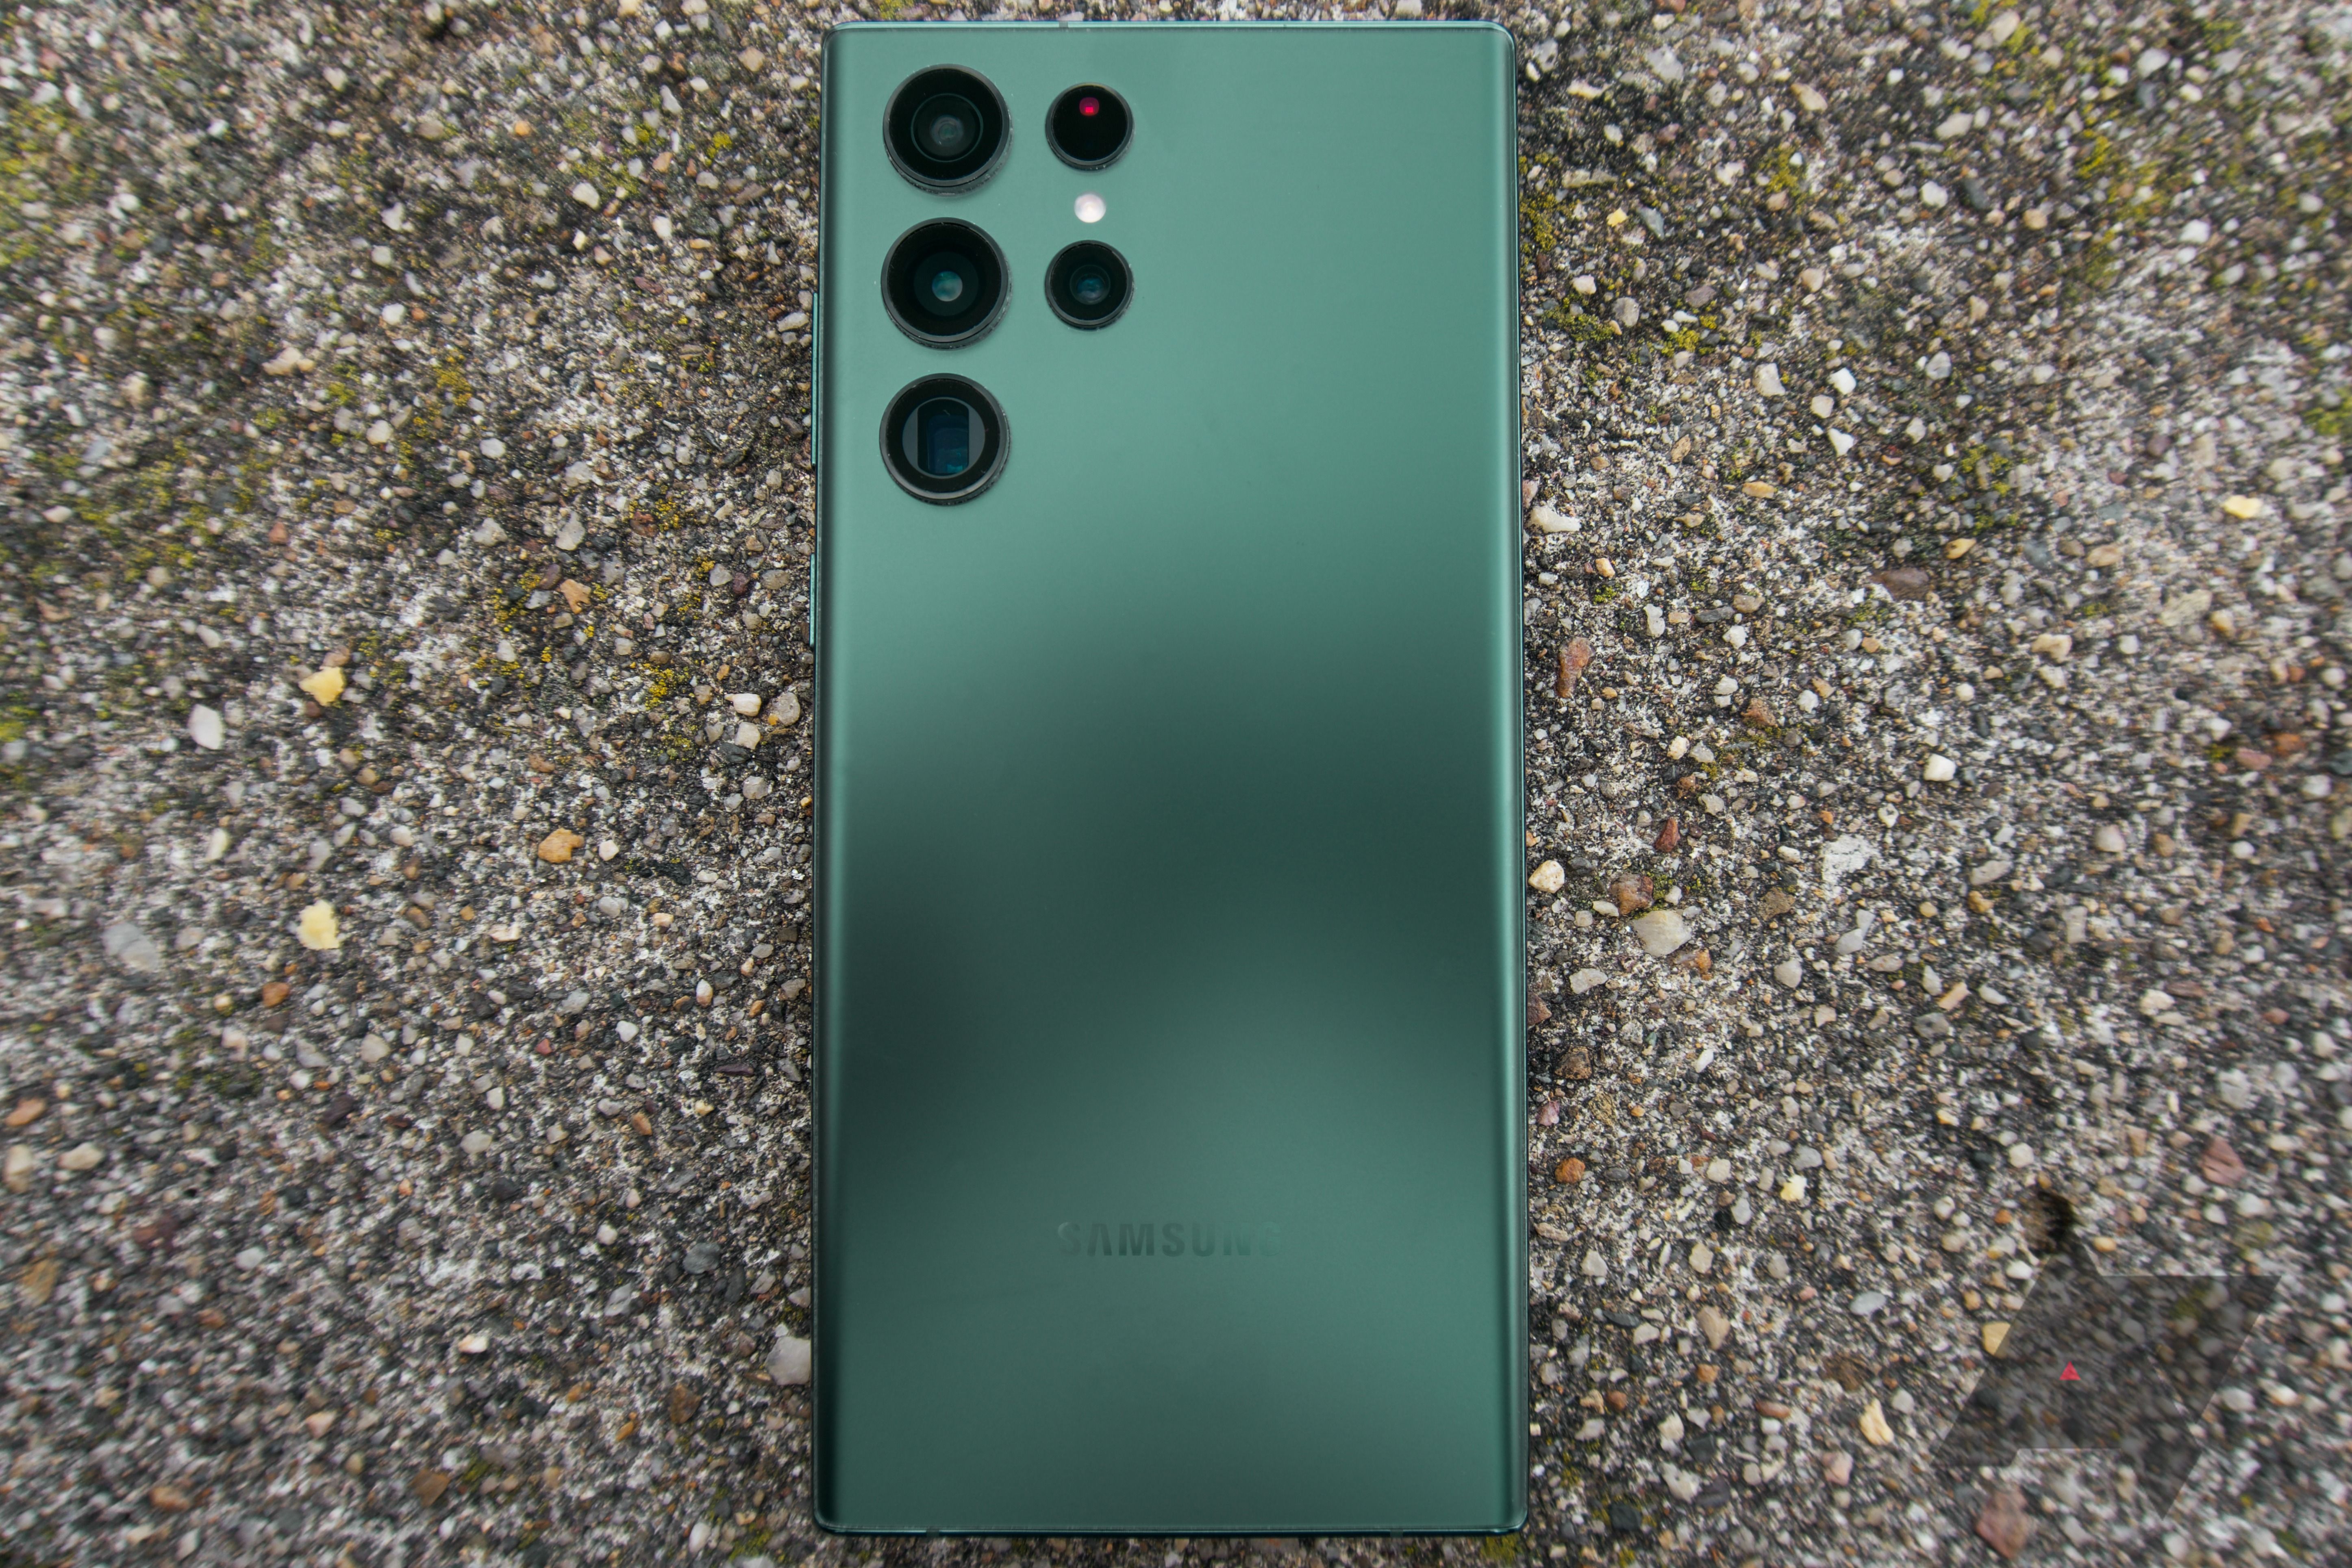 A green Galaxy S22 Ultra face down on concrete